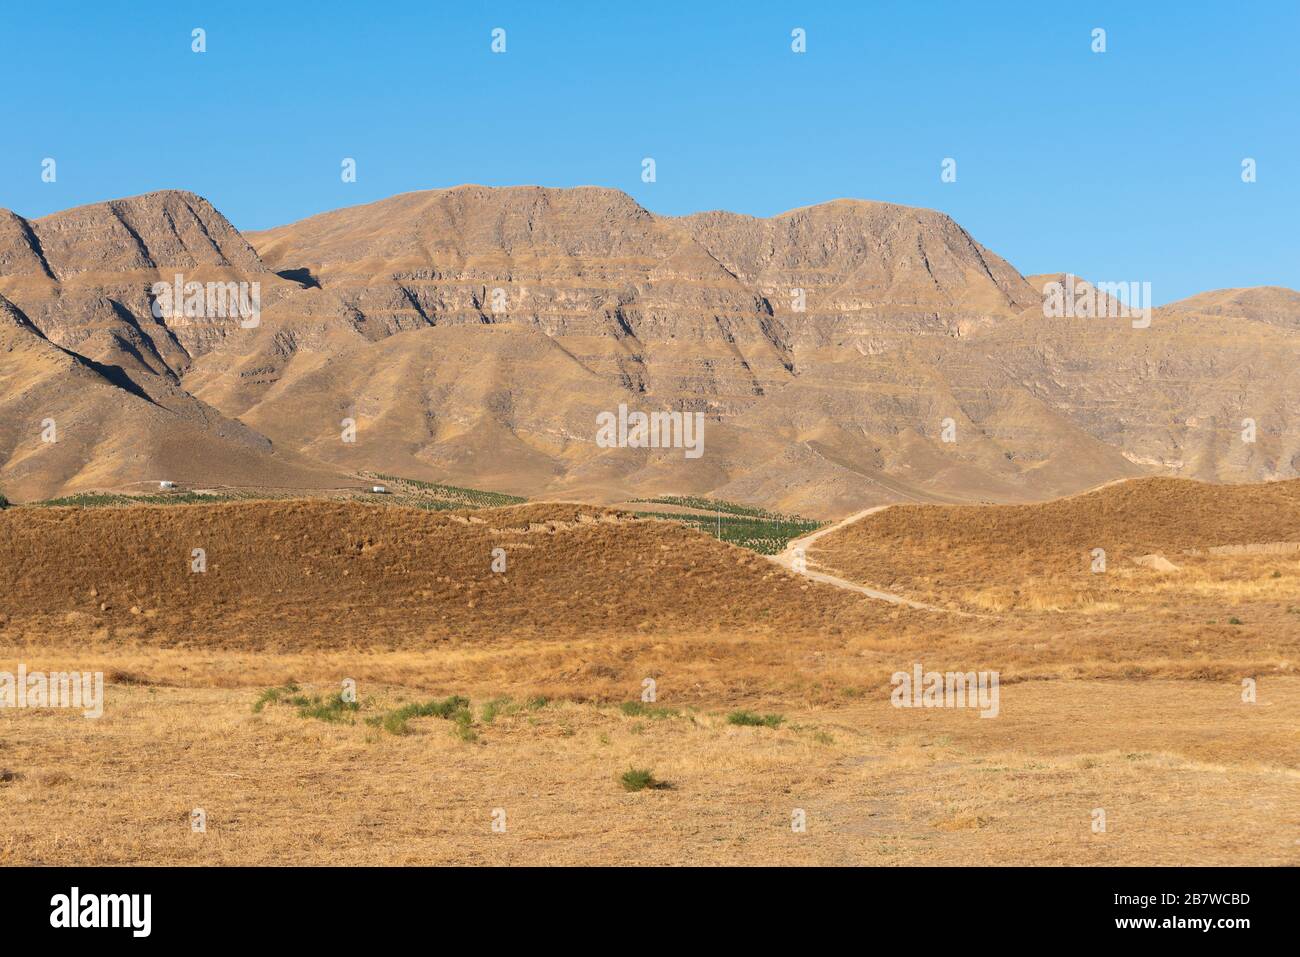 Turkmenistan topography with Kopet Dag mountain and dry soil. High mountains lookin towards Iran border. Beautiful landscape in Central Asia. Stock Photo